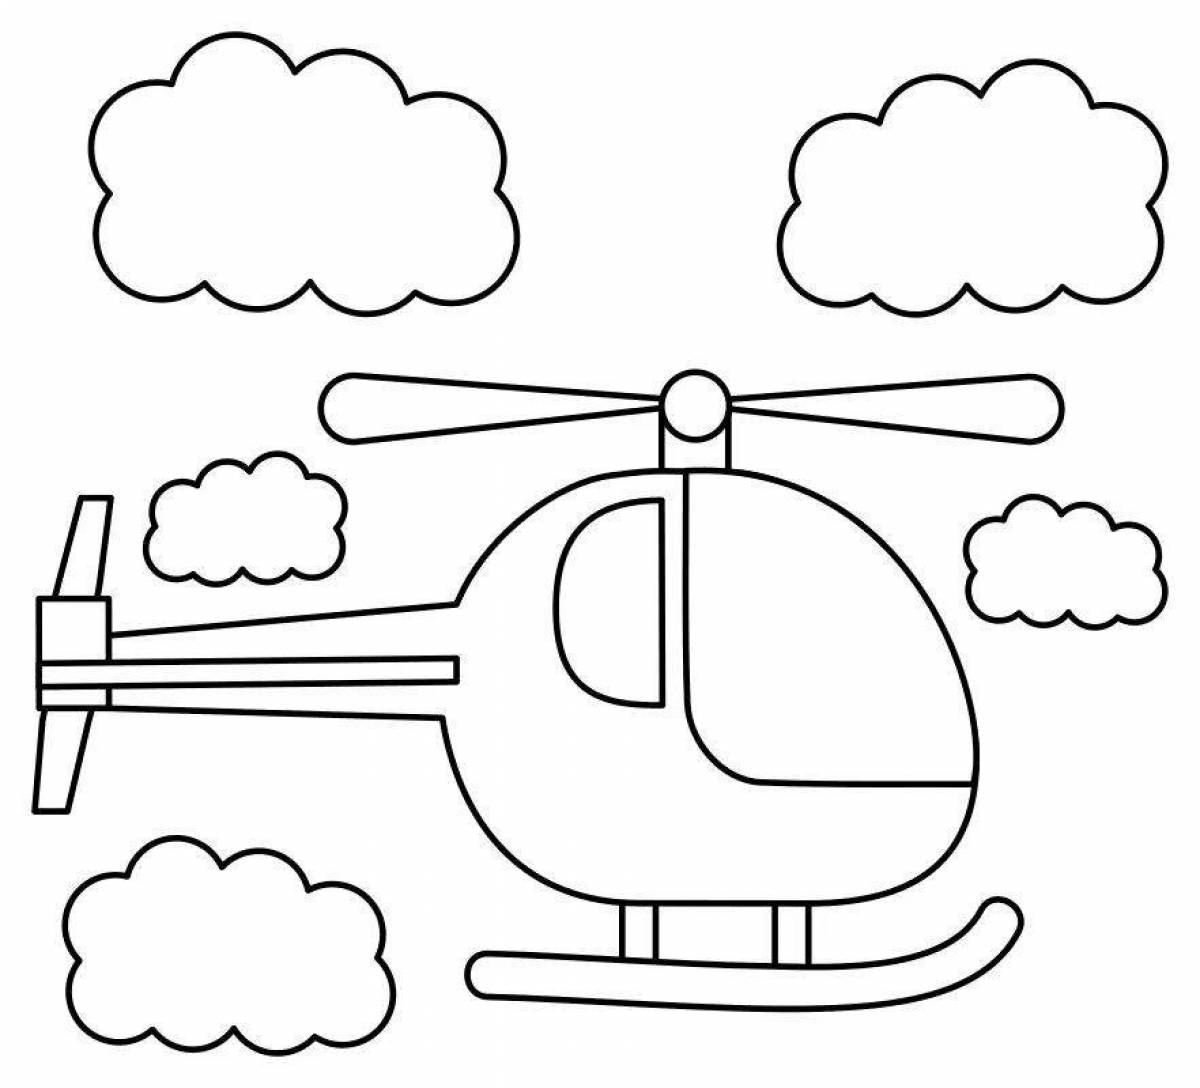 Coloring Helicopter for kids